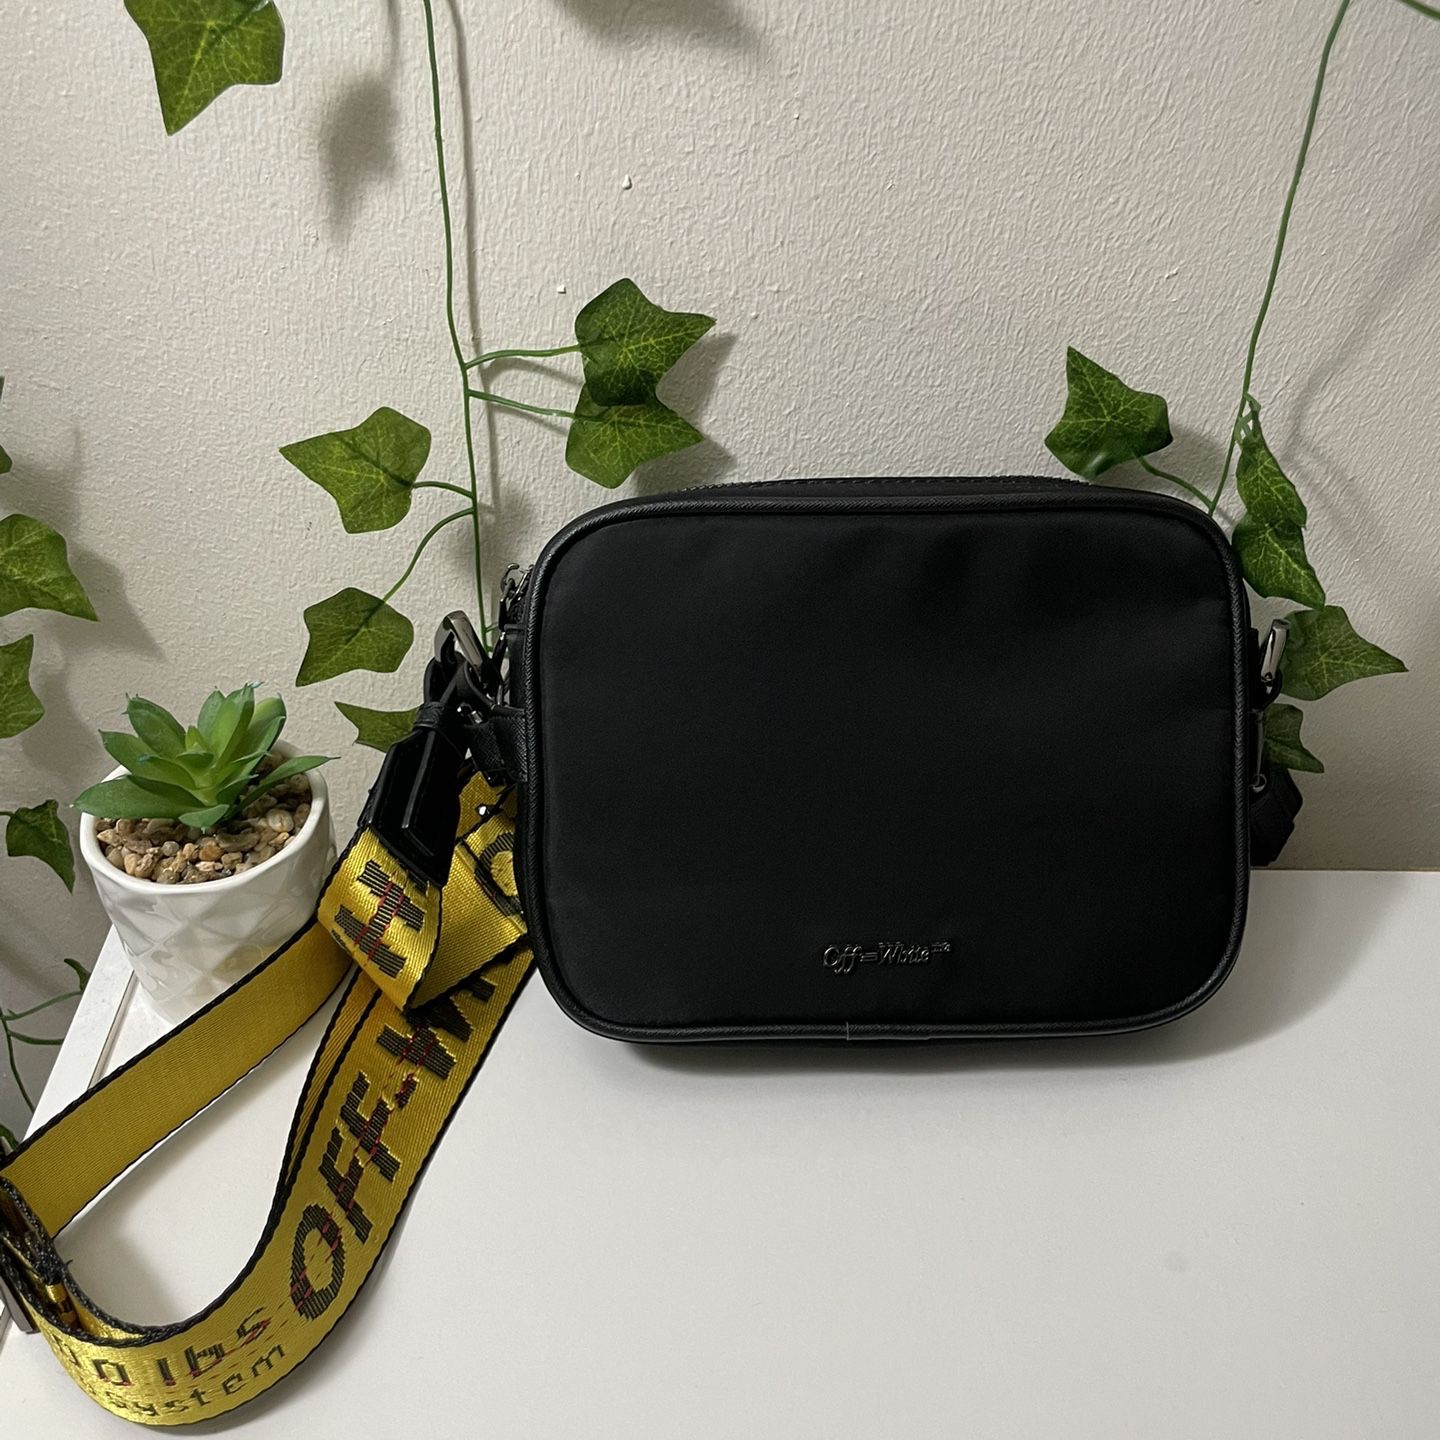 Victoria Secret Crossbody for Sale in Brooklyn, NY - OfferUp